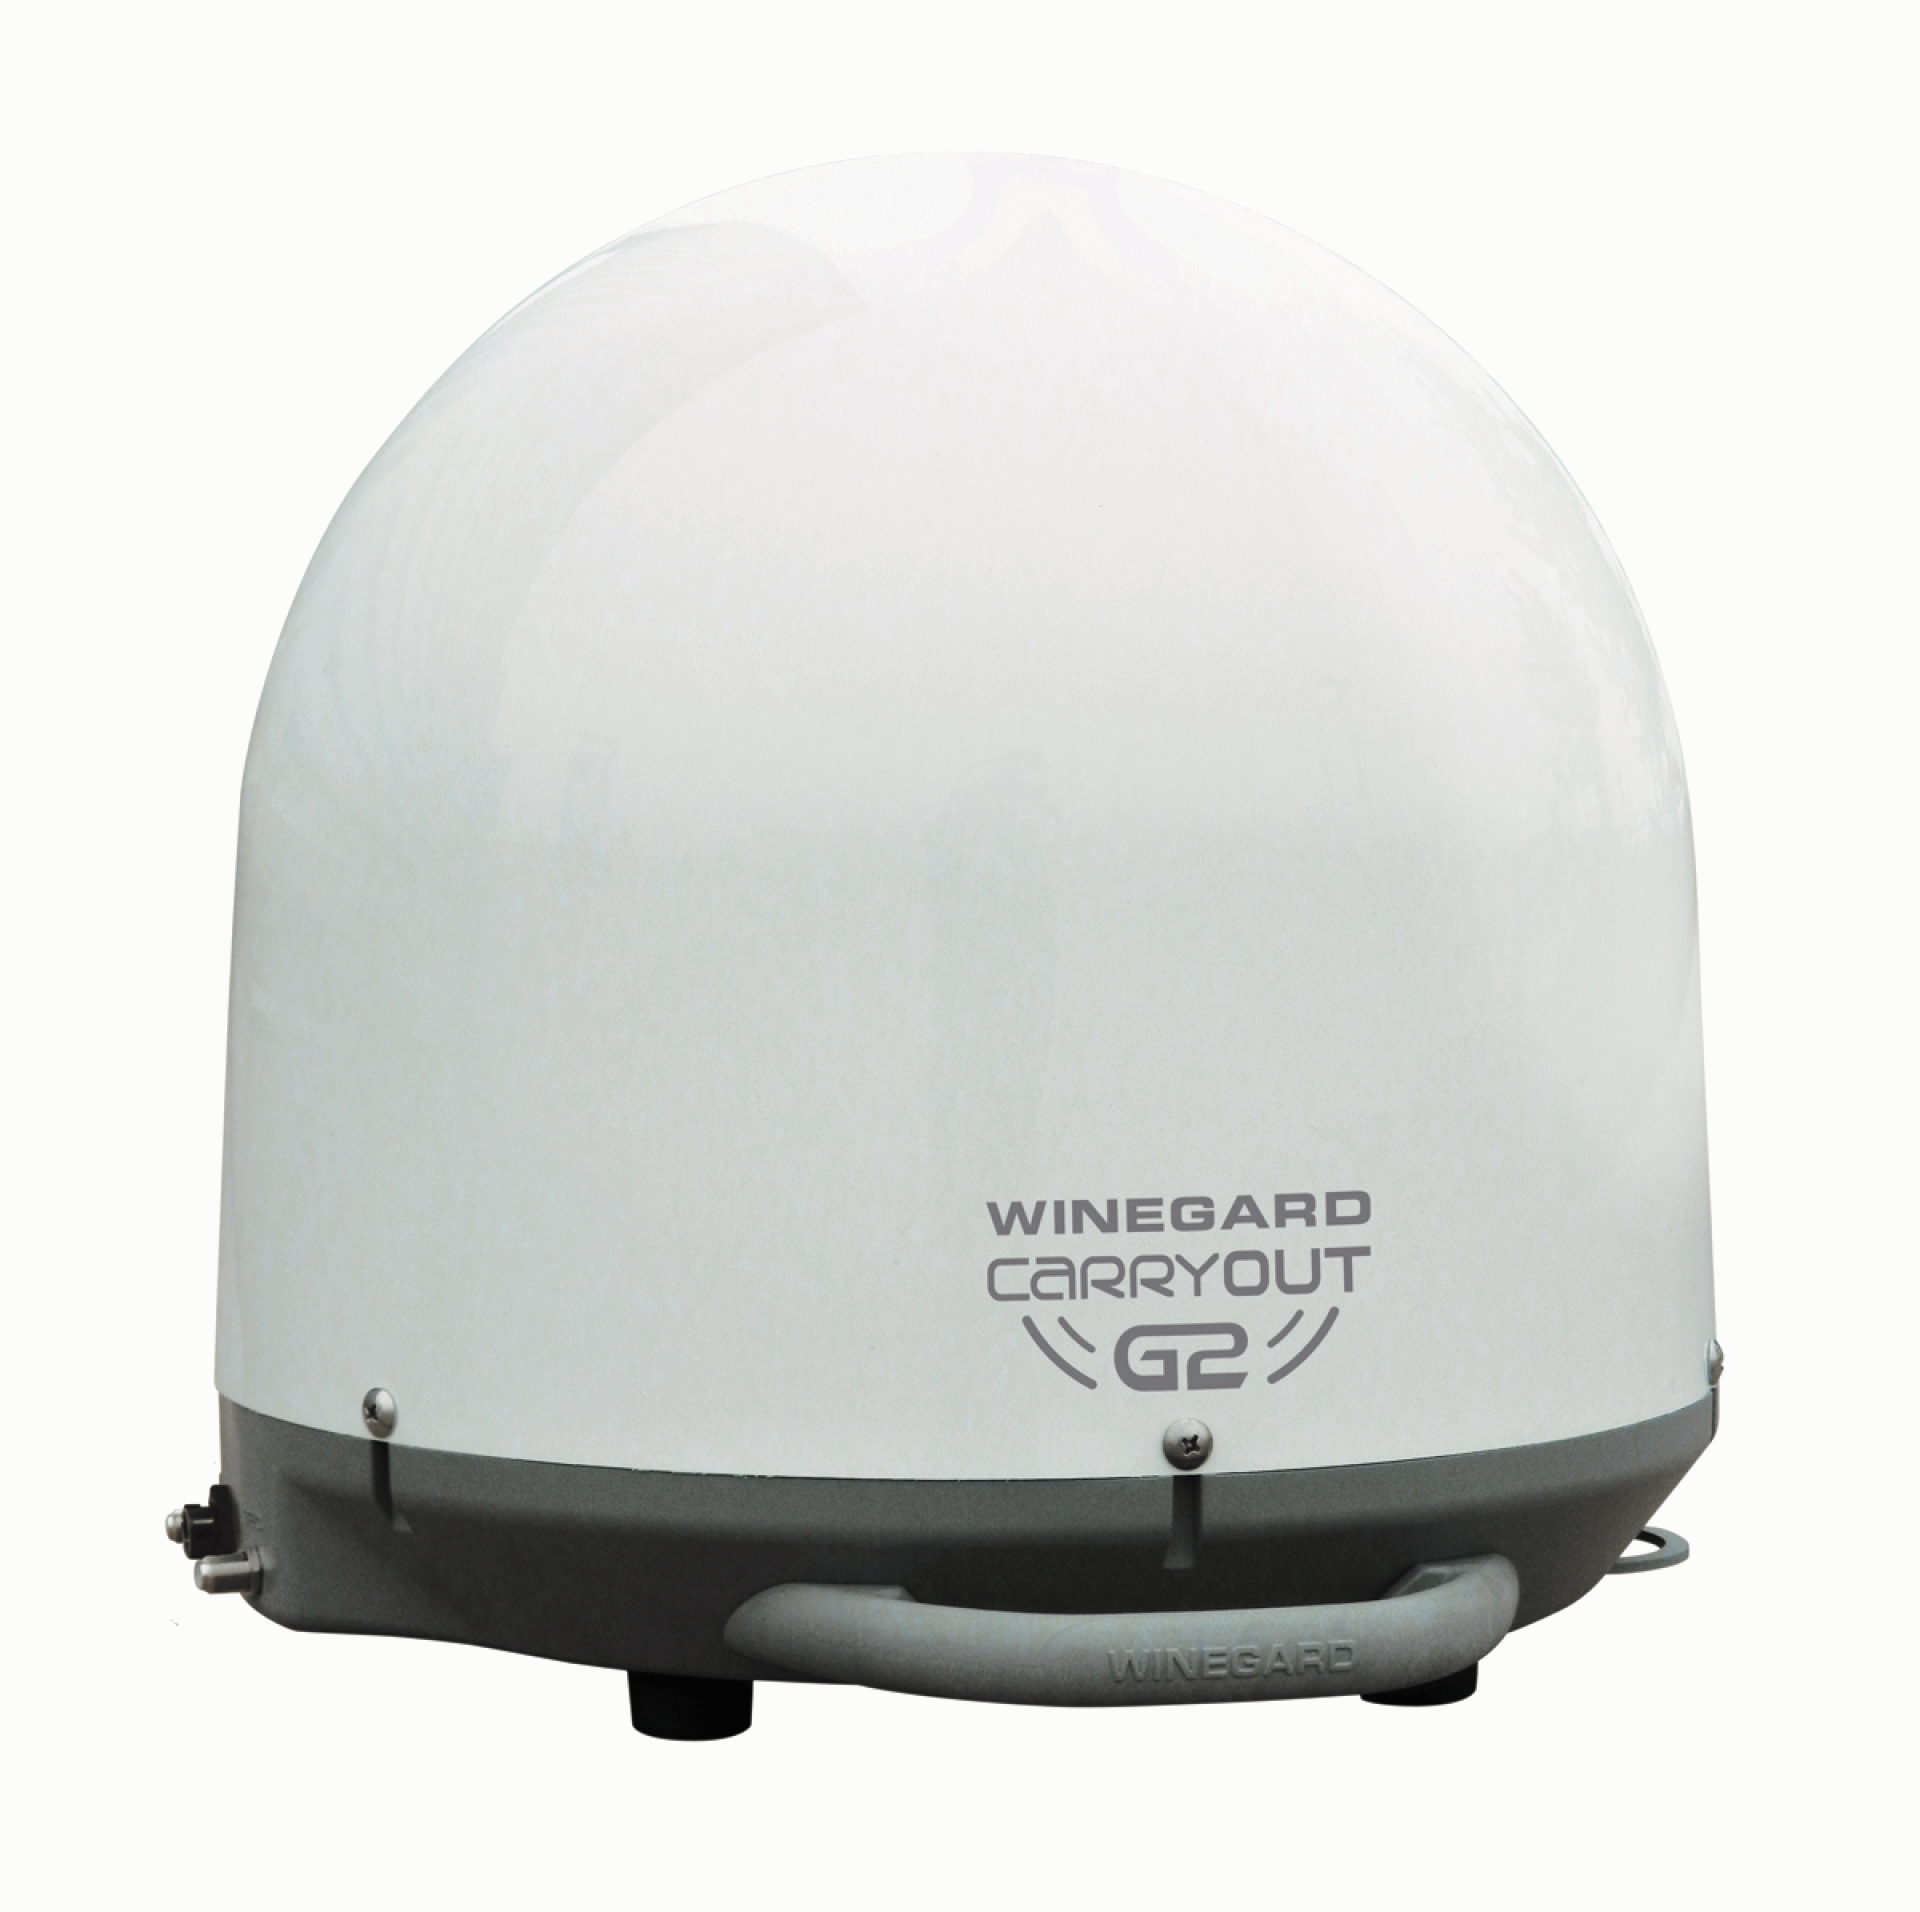 Winegard | GM-2000 | Carryout G2 Automatic Portable Satellite Antenna